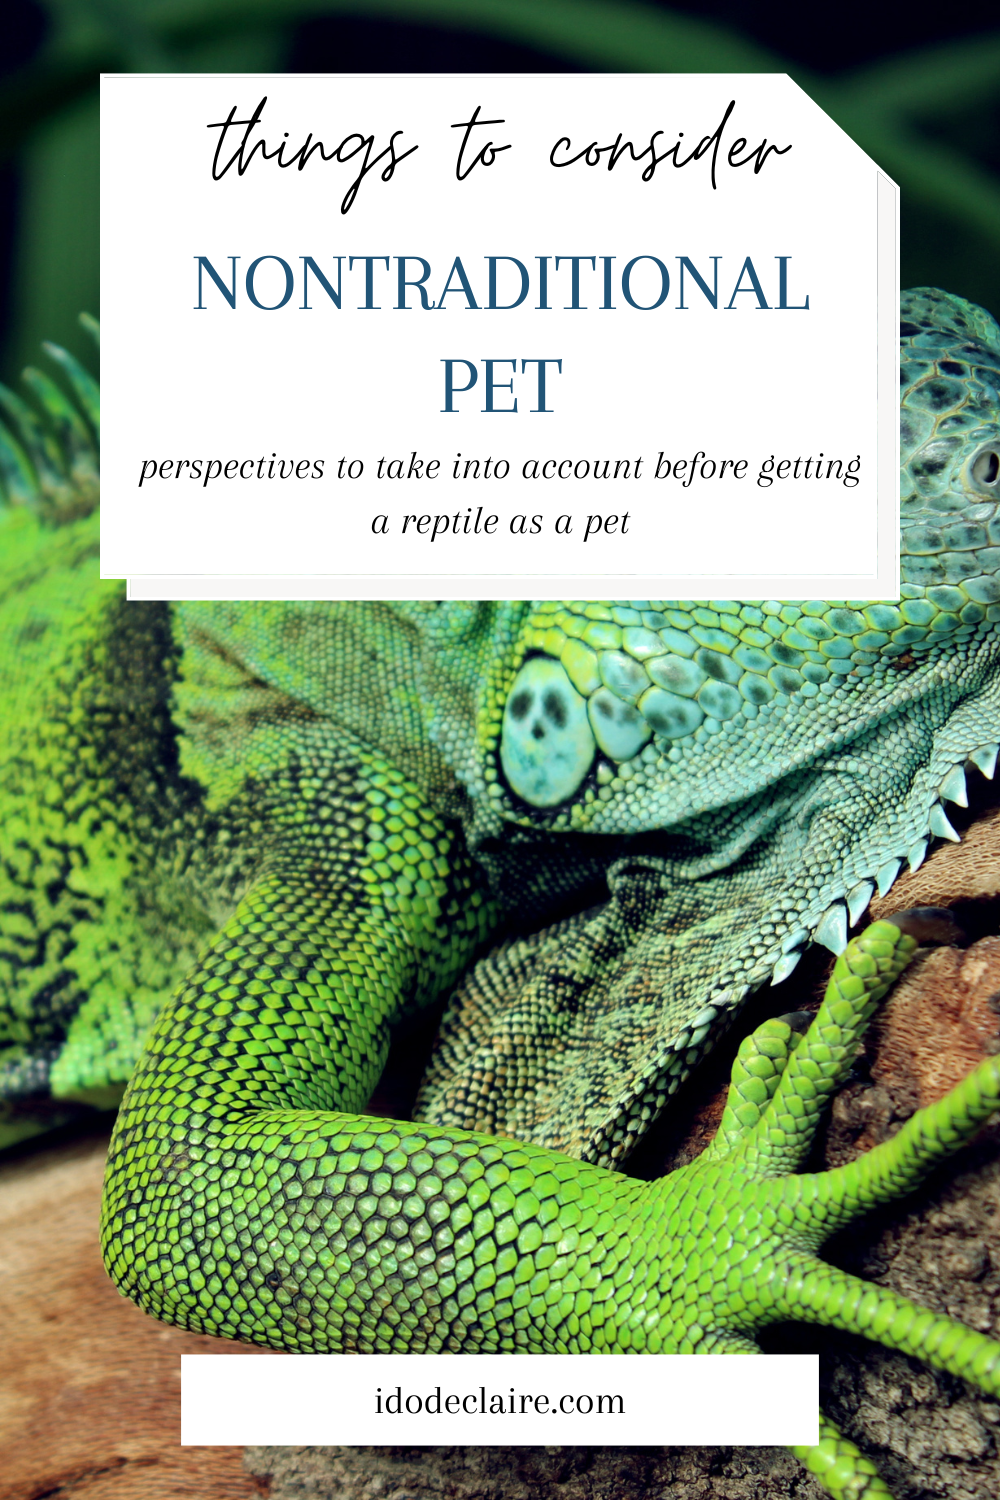 Things to Consider Before Getting a Nontraditional Pet